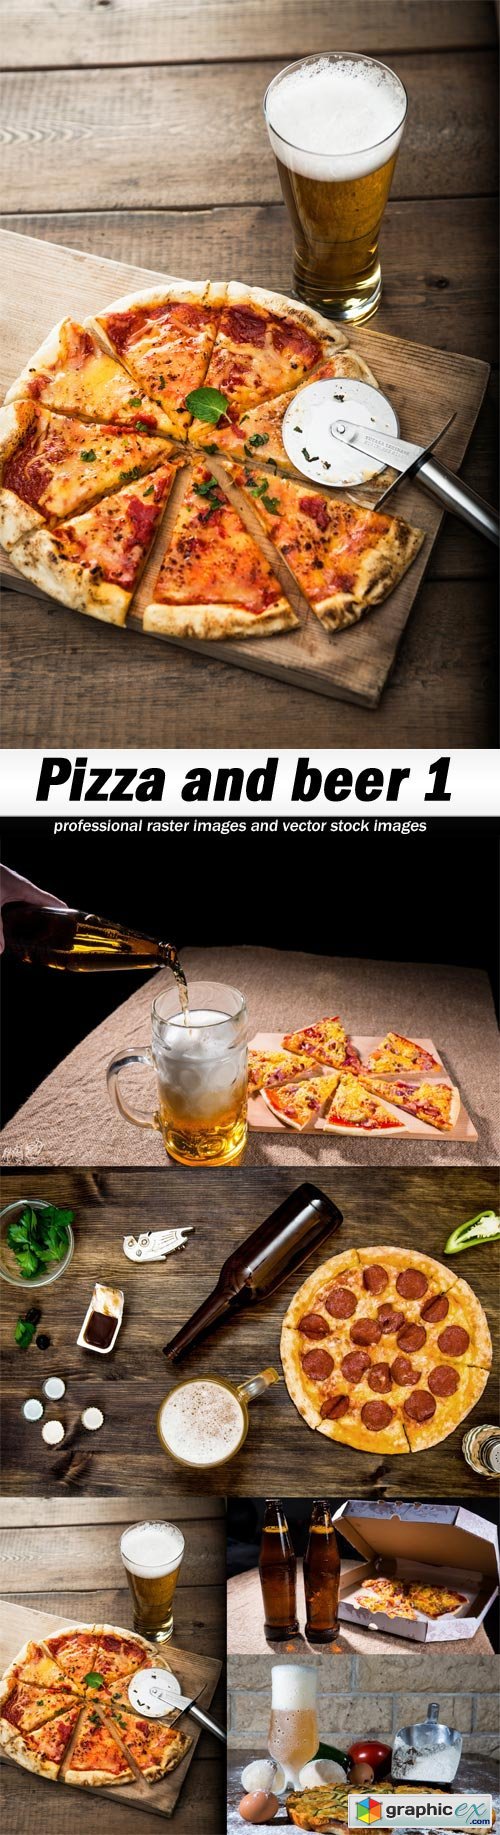 Pizza and beer 1-5xJPEGs